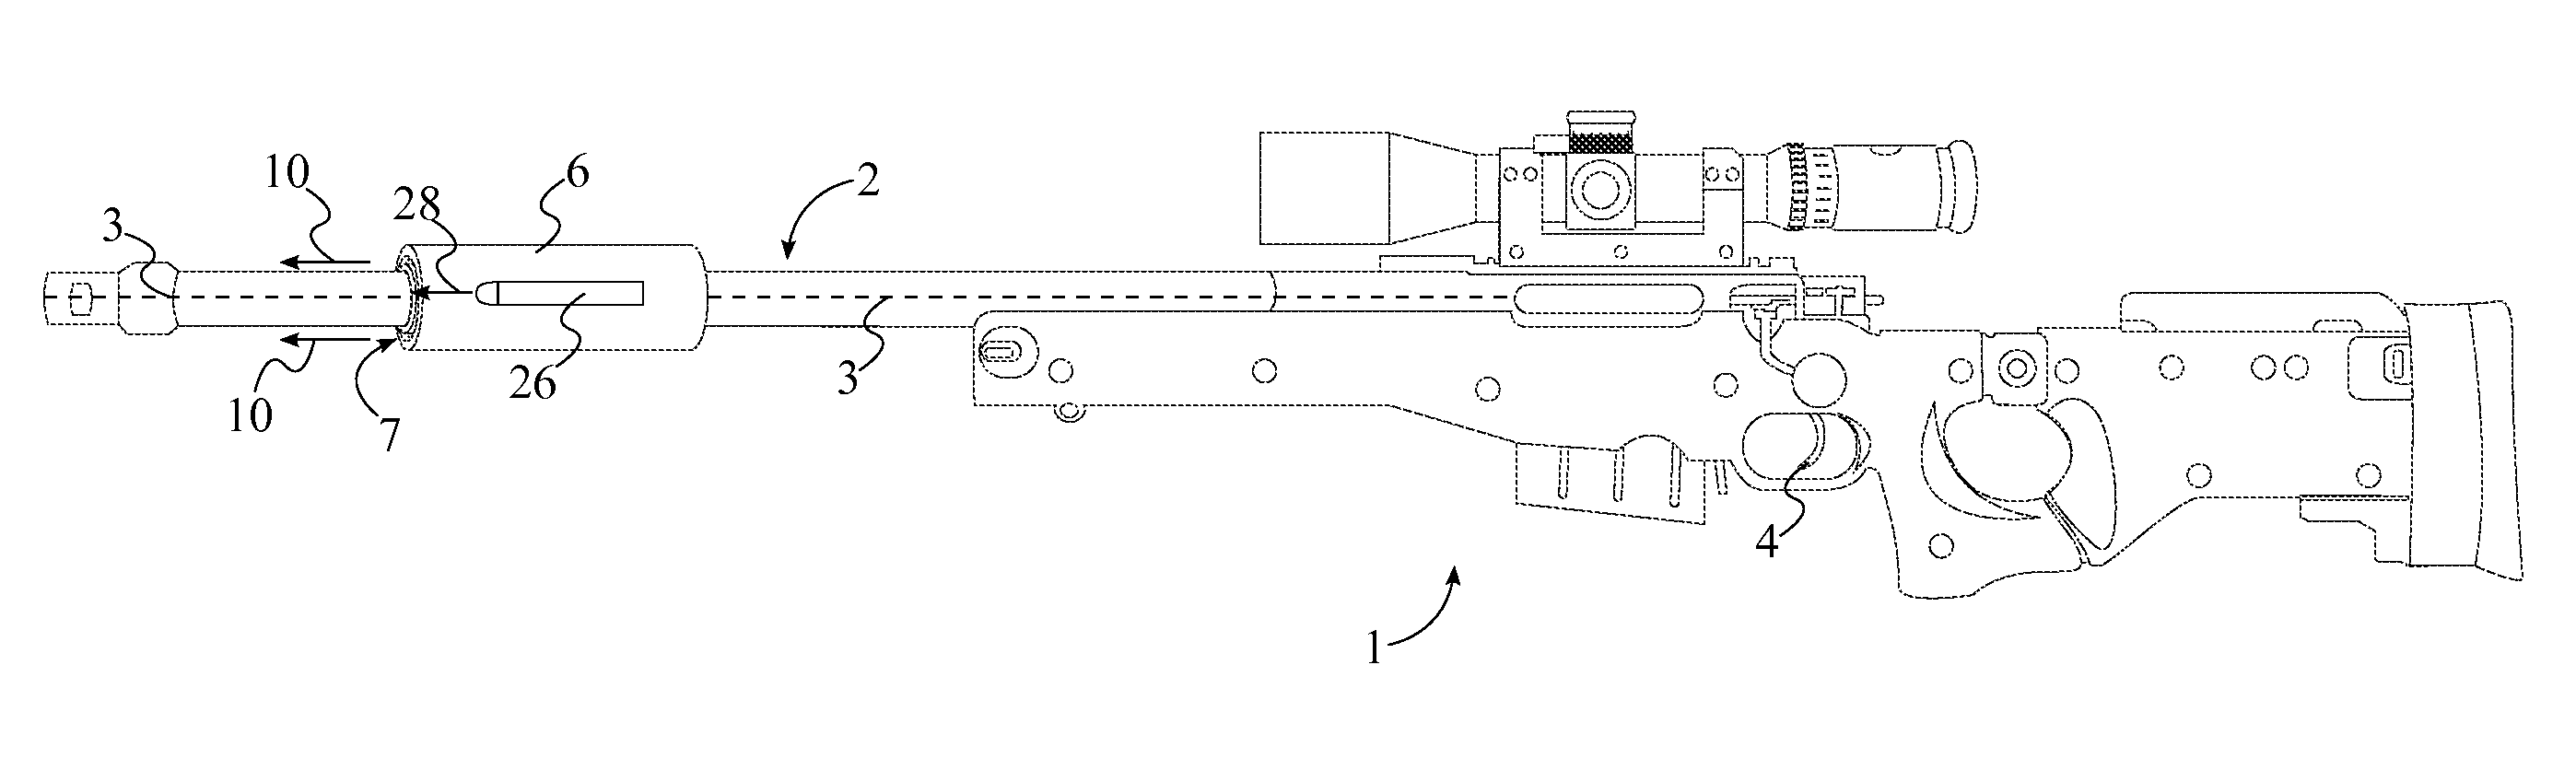 Laser-guided projectile system